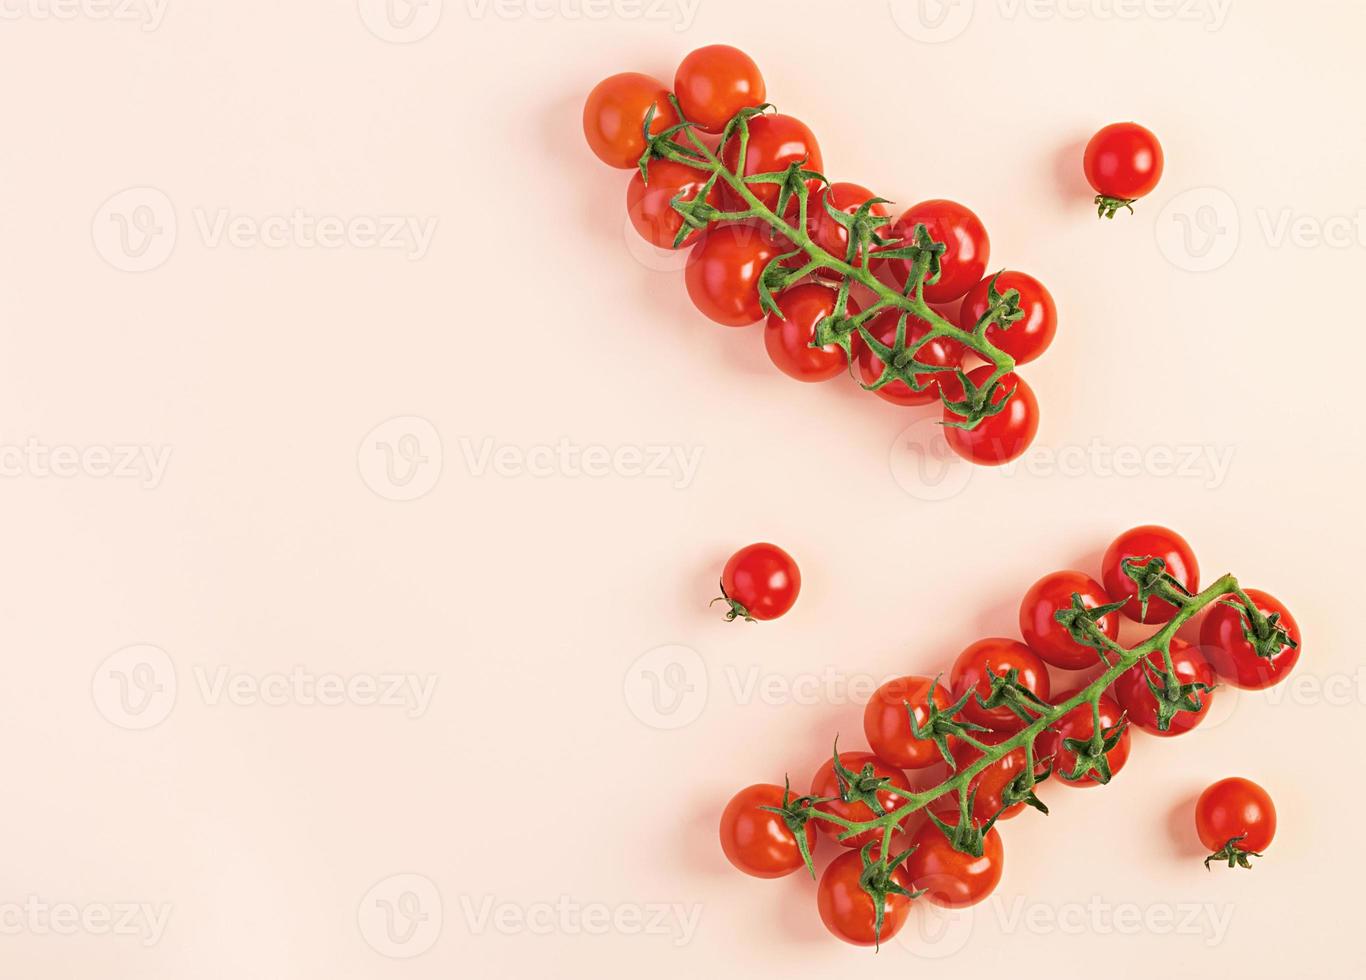 Isolated fresh red cherry tomatoes on beige background. Top view. Flat lay photo